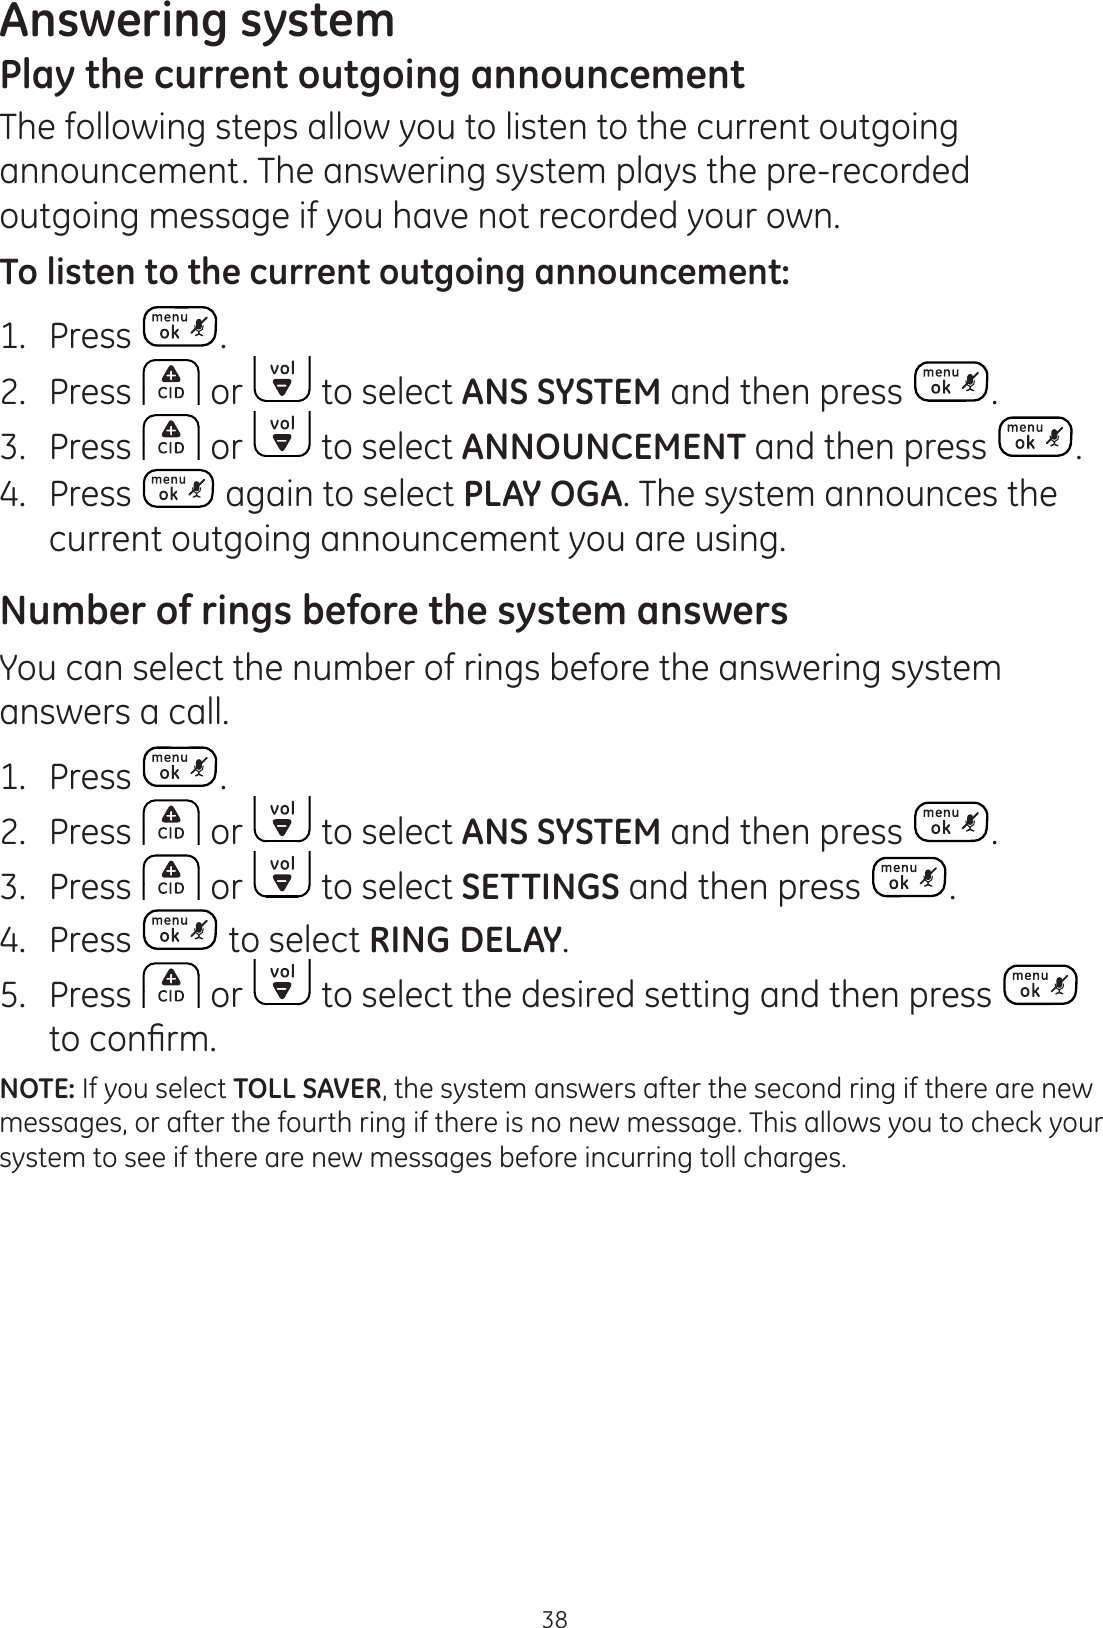 Answering system38Play the current outgoing announcementThe following steps allow you to listen to the current outgoing announcement. The answering system plays the pre-recorded outgoing message if you have not recorded your own. To listen to the current outgoing announcement:1.  Press .2.  Press   or   to select ANS SYSTEM and then press  .3.  Press   or   to select ANNOUNCEMENT and then press  .4.  Press   again to select PLAY OGA. The system announces the current outgoing announcement you are using. Number of rings before the system answersYou can select the number of rings before the answering system answers a call.1.  Press  .2.  Press   or   to select ANS SYSTEM and then press  . 3.  Press   or   to select SETTINGS and then press  .4.  Press   to select RING DELAY.5.  Press   or   to select the desired setting and then press   WRFRQ¿UPNOTE: If you select TOLL SAVER, the system answers after the second ring if there are new messages, or after the fourth ring if there is no new message. This allows you to check your system to see if there are new messages before incurring toll charges.